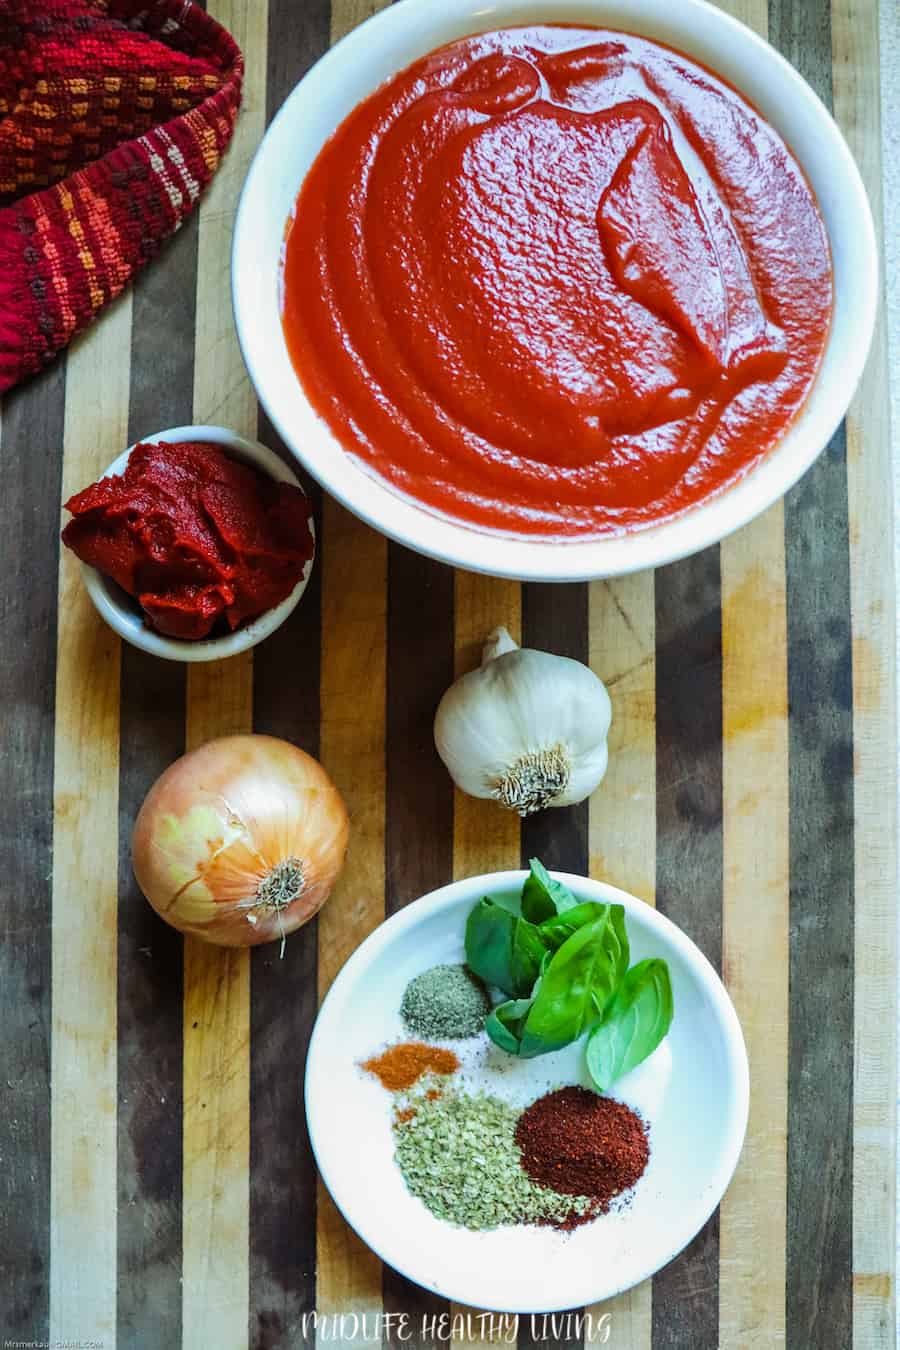 Here we have a featured image that shows the sauce ingredients for weight watchers spaghetti sauce recipe all laid out and ready to begin.